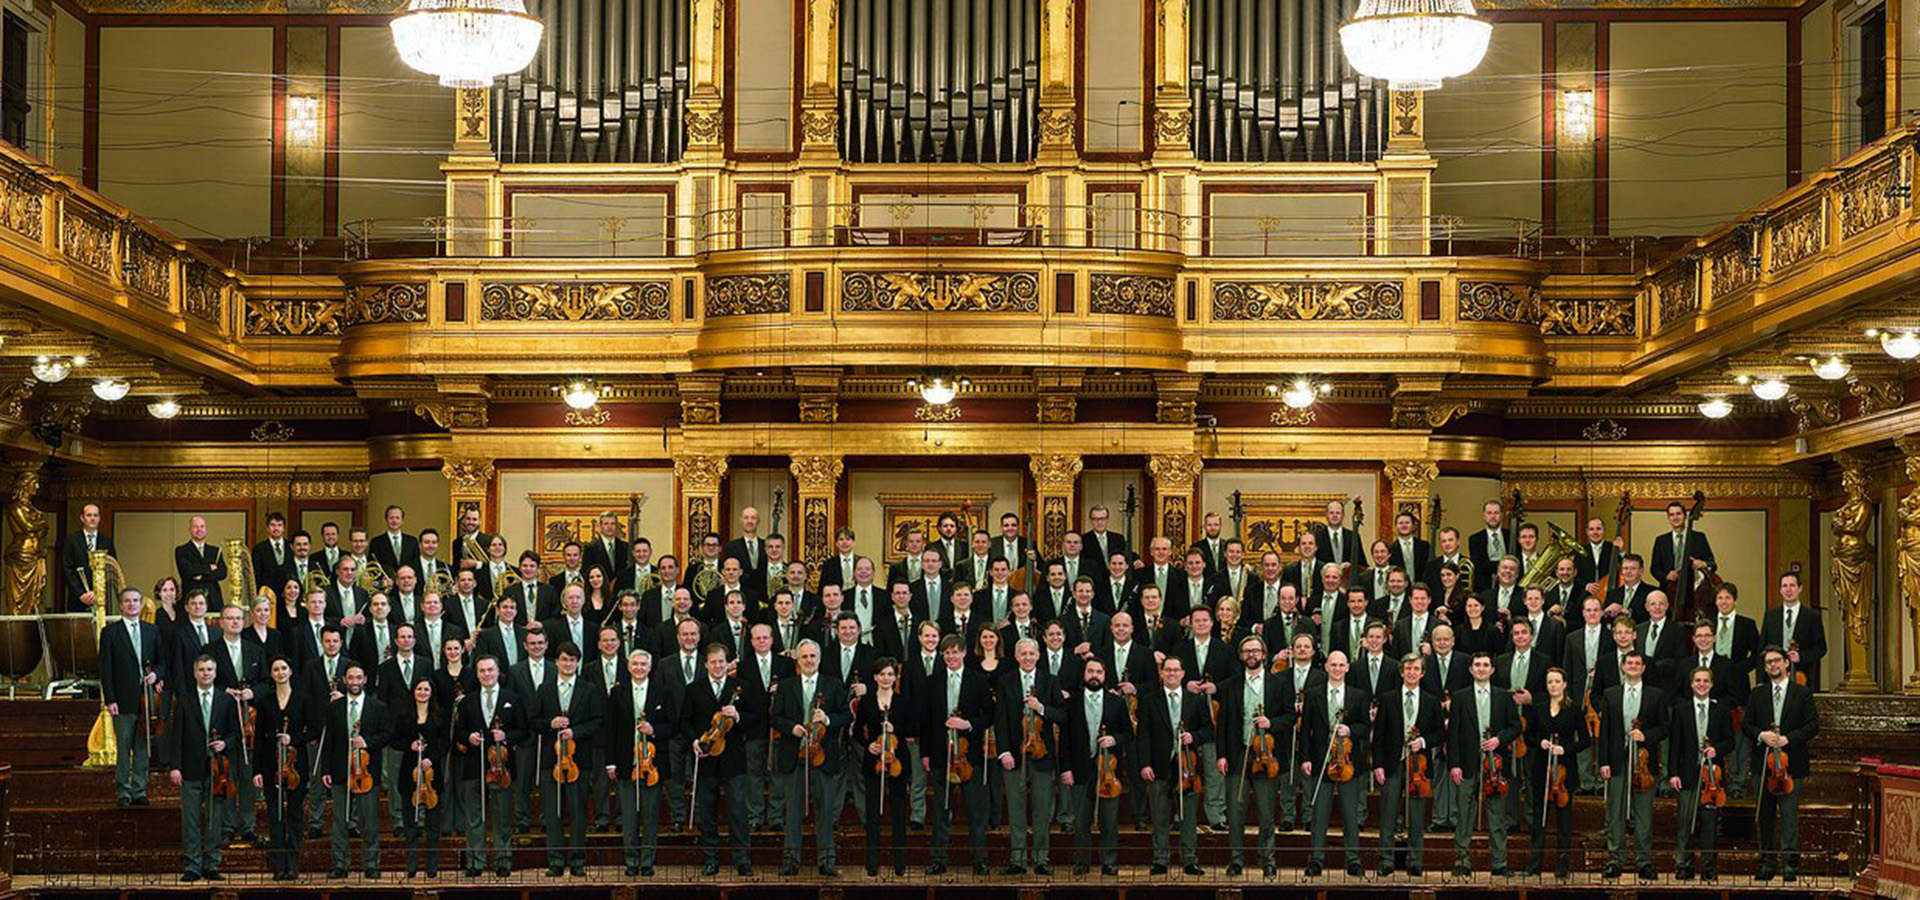 The Vienna Philharmonic stand as a large group in front of an ornate gold organ, holding their instruments and wearing formal dress.